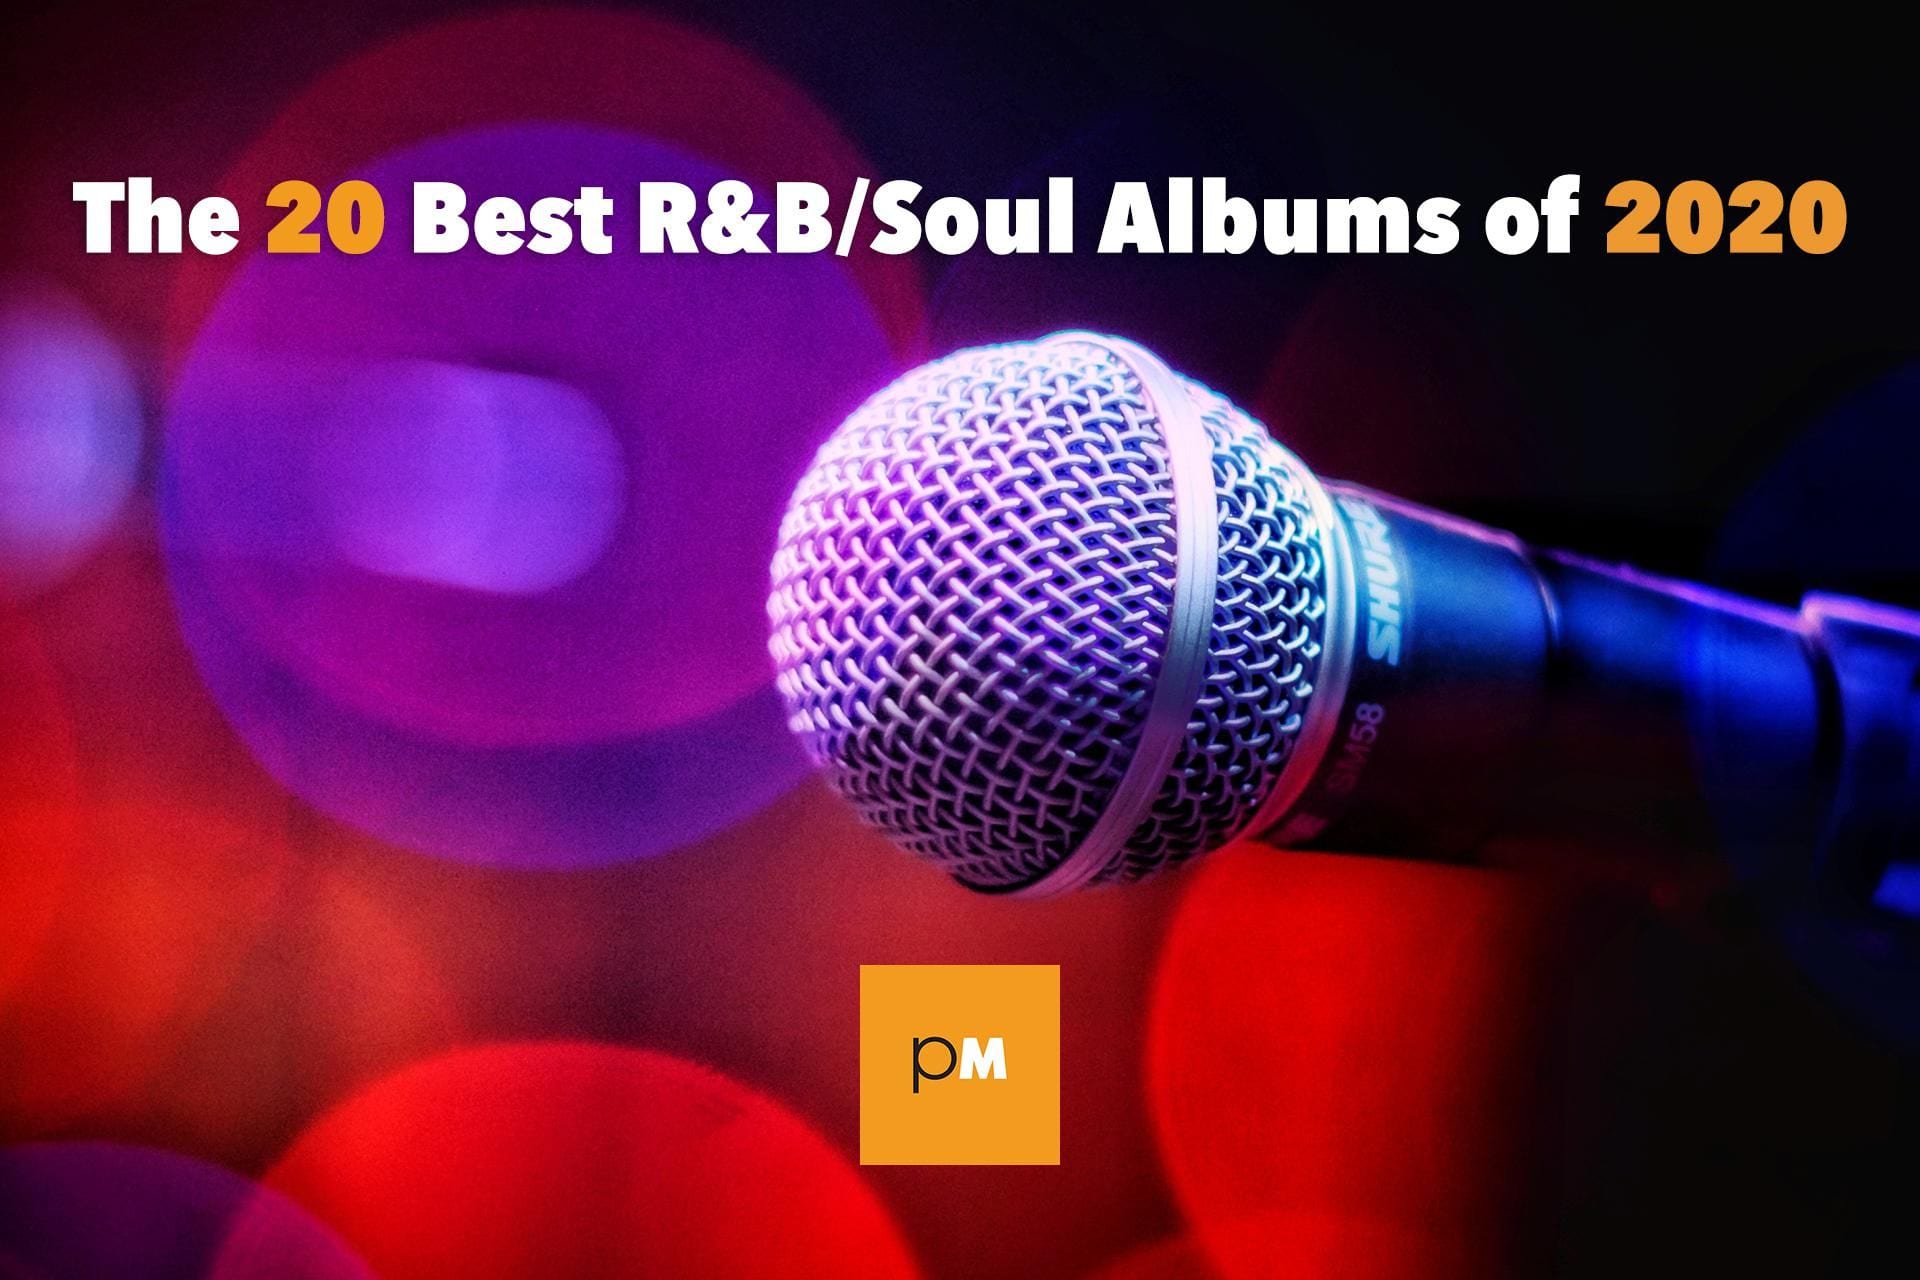 The 20 Best R&B/Soul Albums of 2020